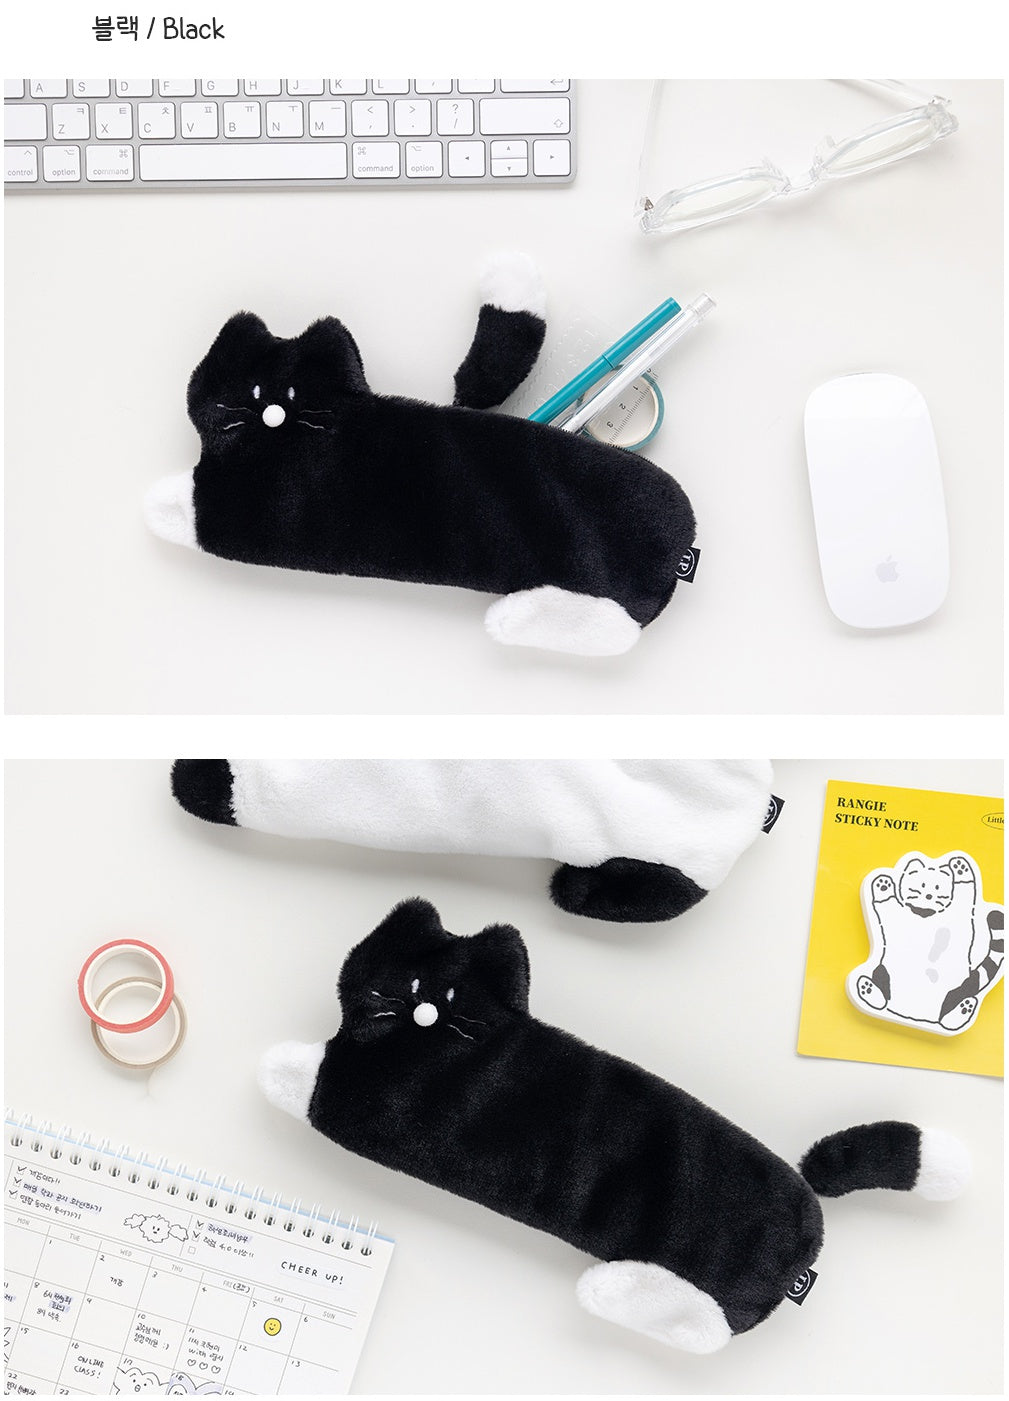 Little Paper Kity Cats Tails Slim Pencil Cases Cosmetics Pouches Stationery School Office Bags Gifts Purses Students Cute Teens Girls